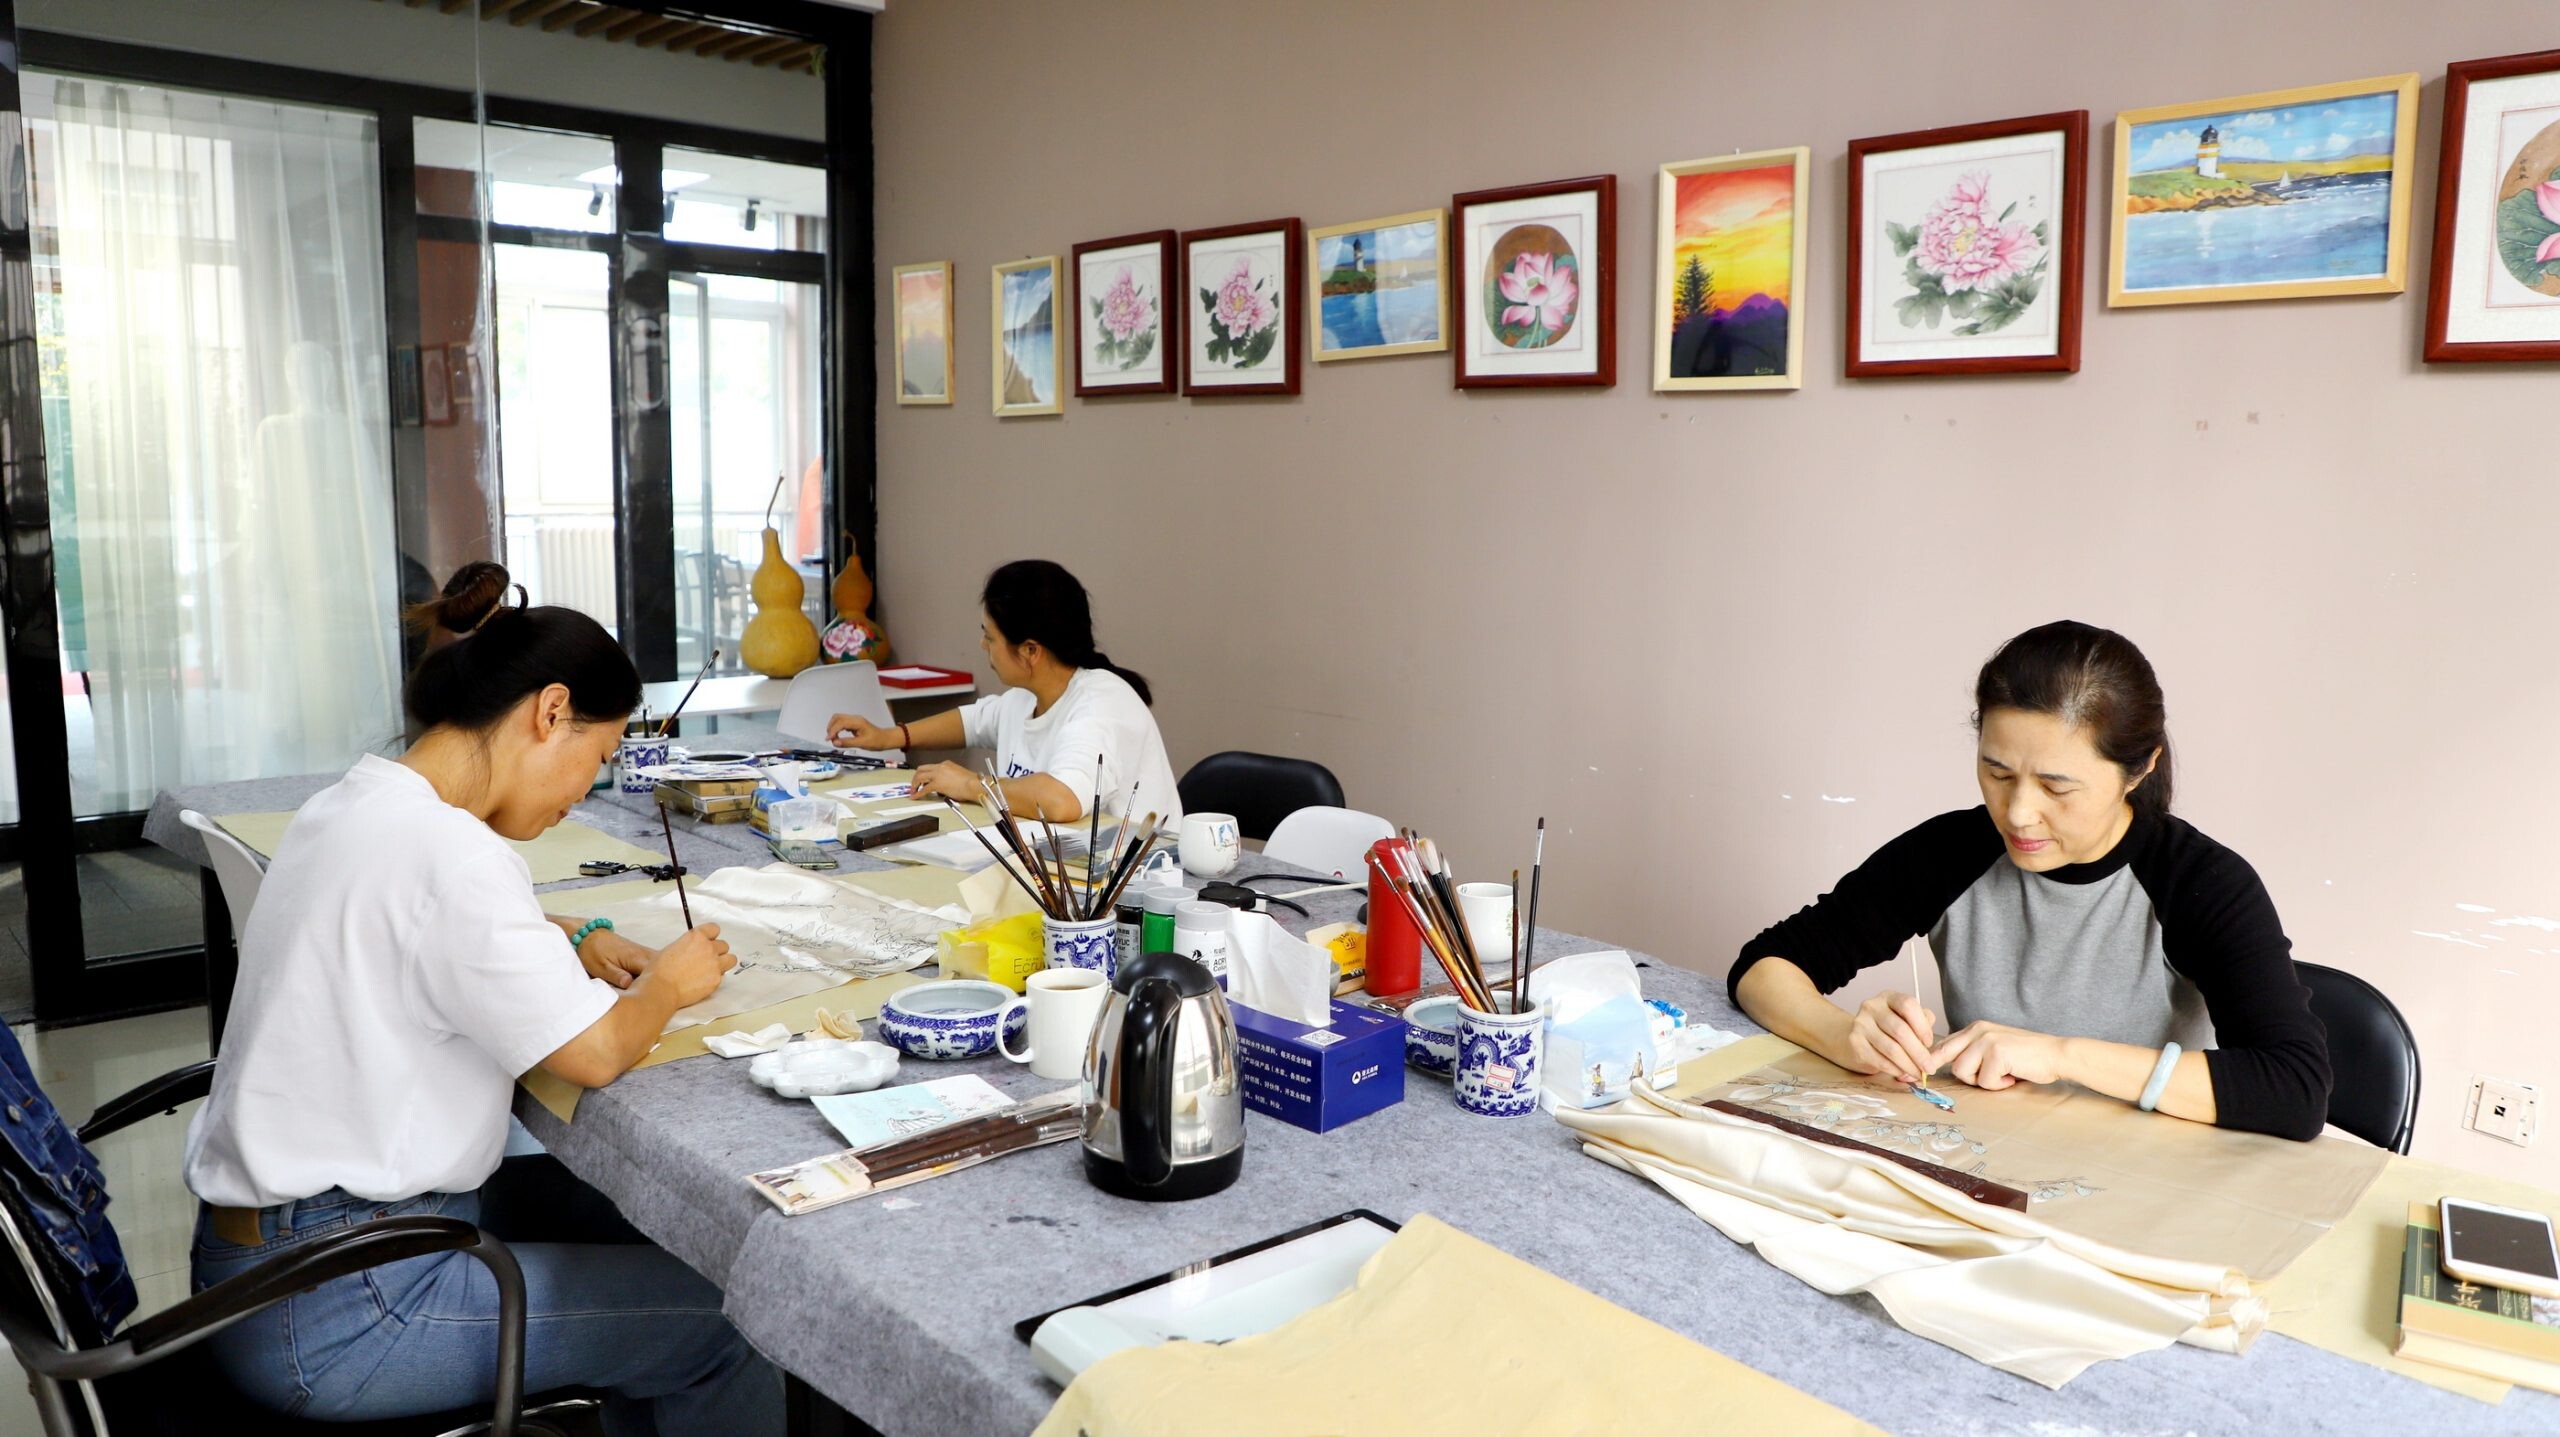 Rizhao Economic and Technical Development Zone: Freehand Sketching Outlines a New Landscape of "Intangible Cultural Heritage and Cultural Creativity"